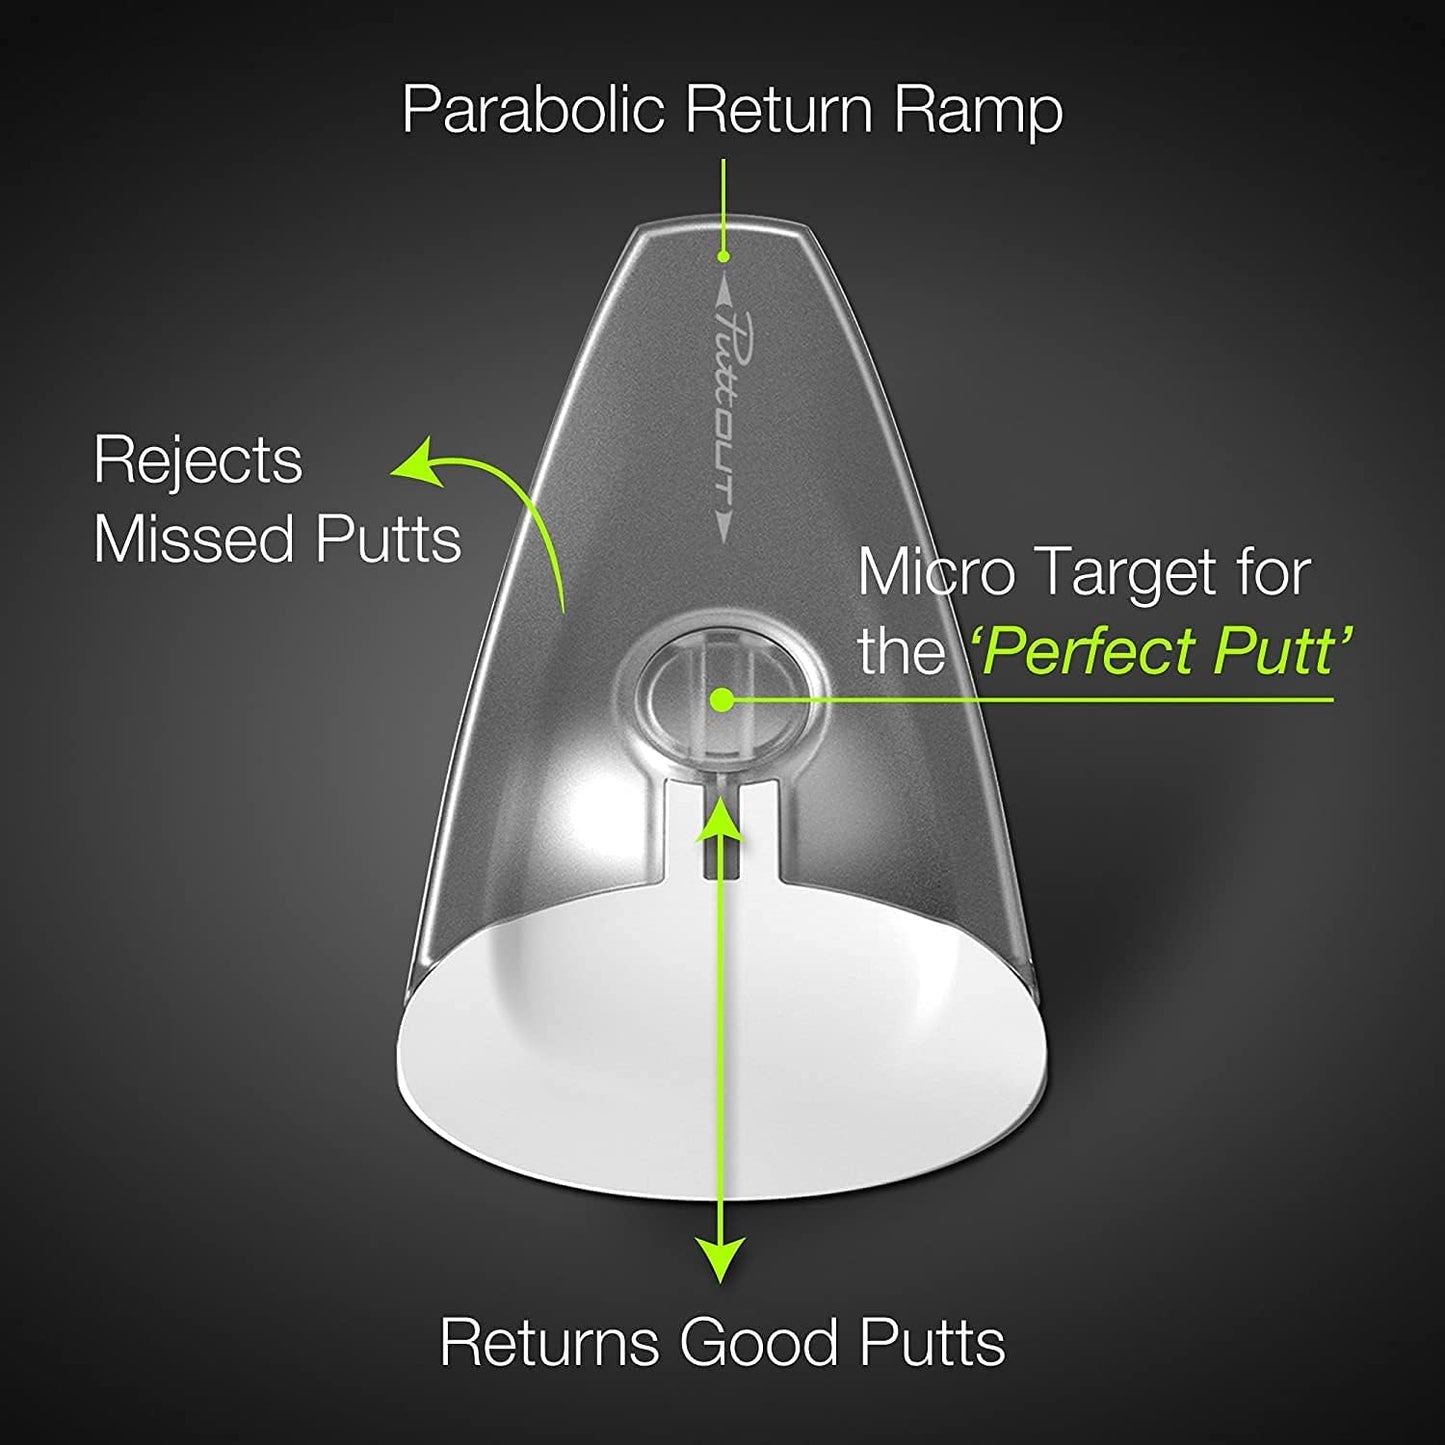 Pressure Putt Trainer - Training Aid Perfect Your Golf Putting